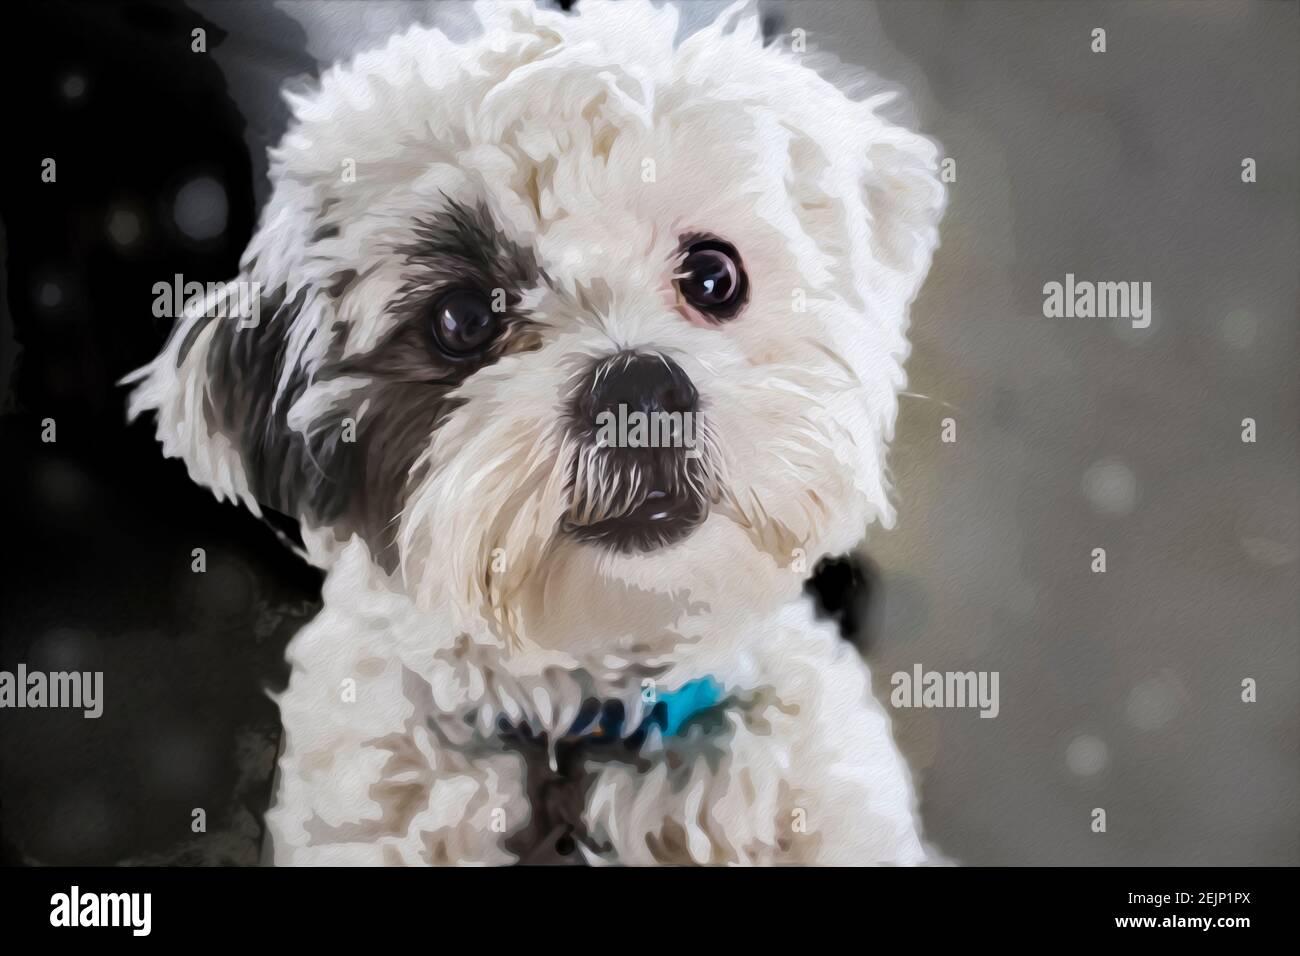 Close-up of very cute fluffy white dog with dark hair around one eye looking like he wants to be petted Stock Photo